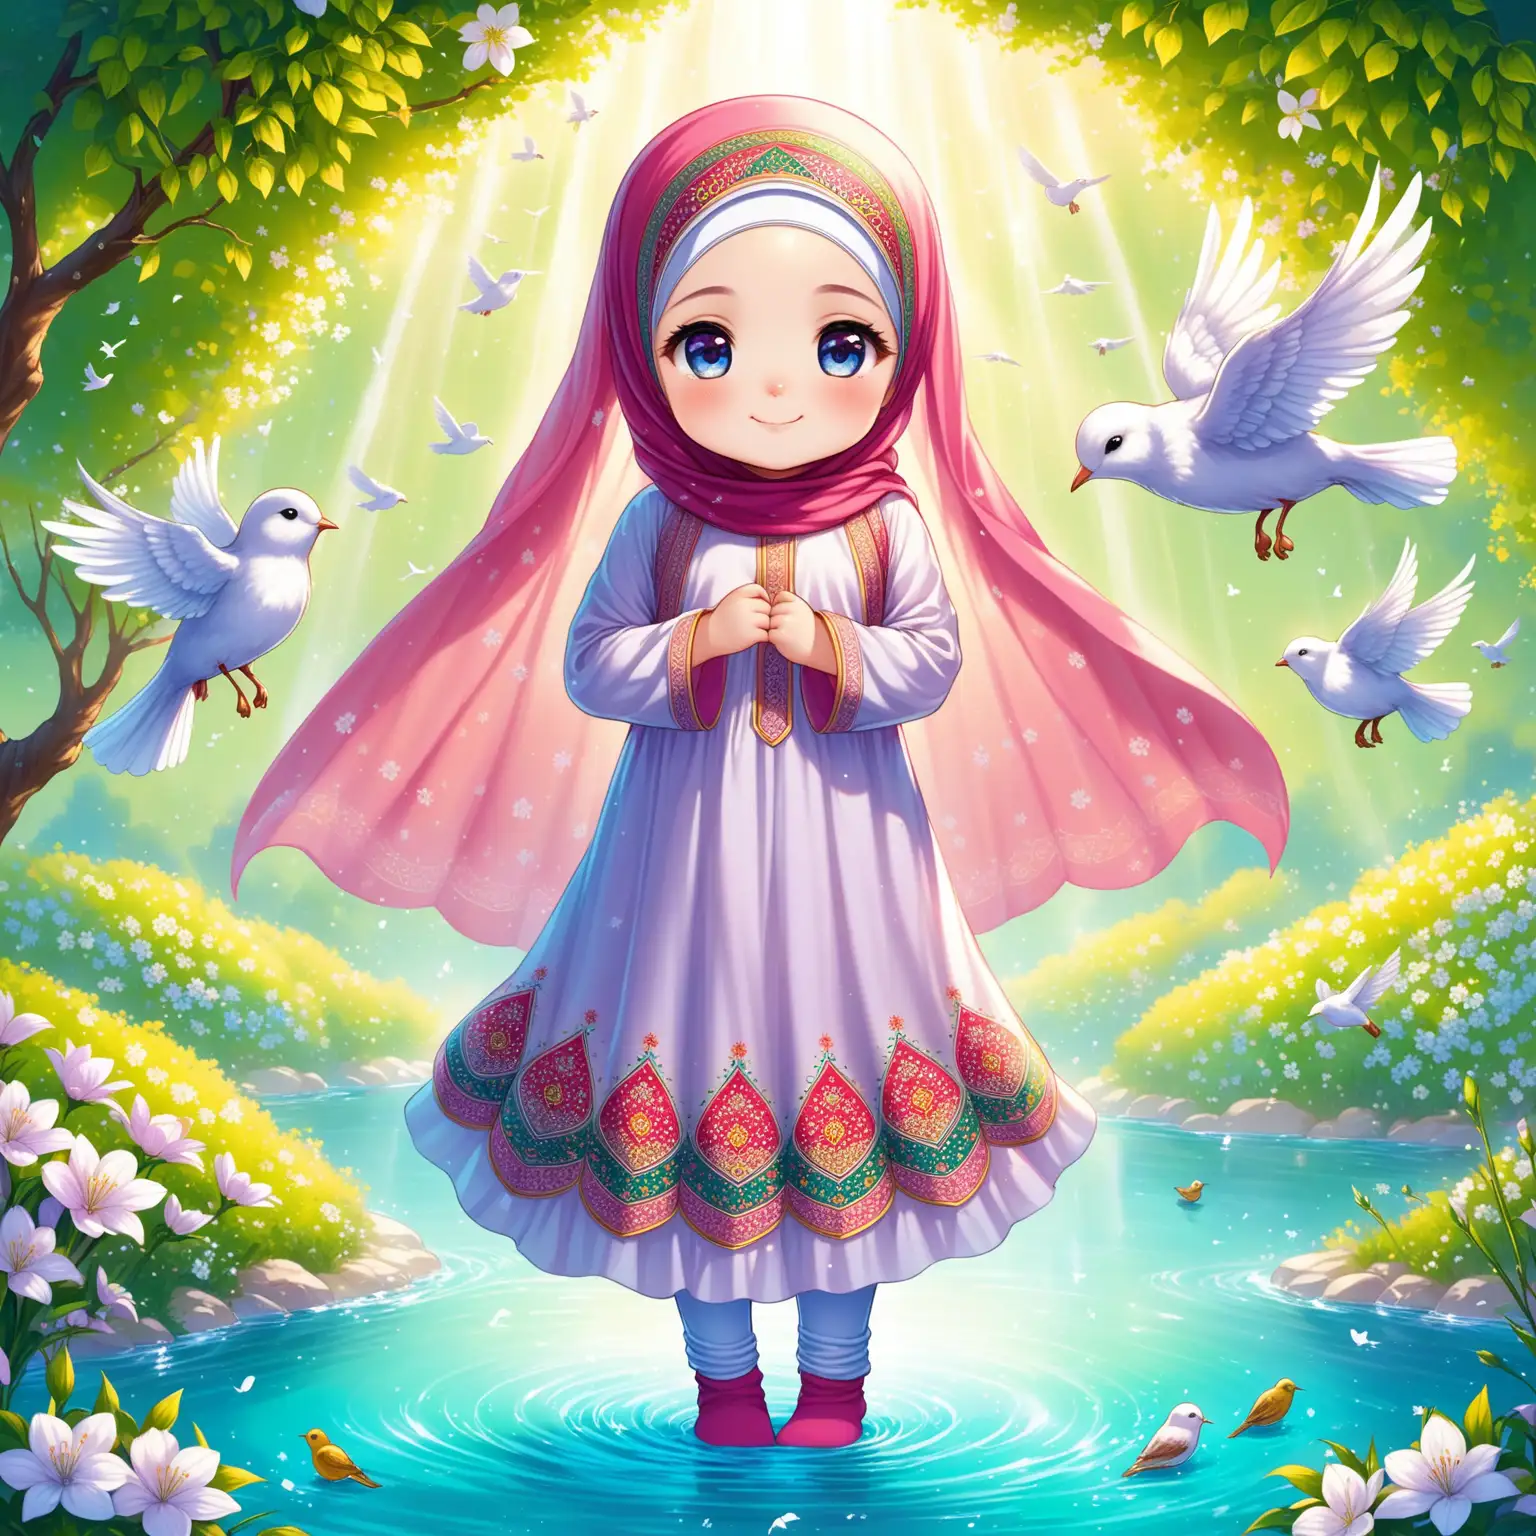 Character Persian little girl(full height, Muslim, with emphasis no hair out of veil(Hijab), baby face, eyes must be small, bigger nose, white skin, cute, smiling, wearing socks, clothes full of Persian designs, heavenly girl).

Atmosphere flowing water from the spring with flowers, nightingales and flying birds in spring.